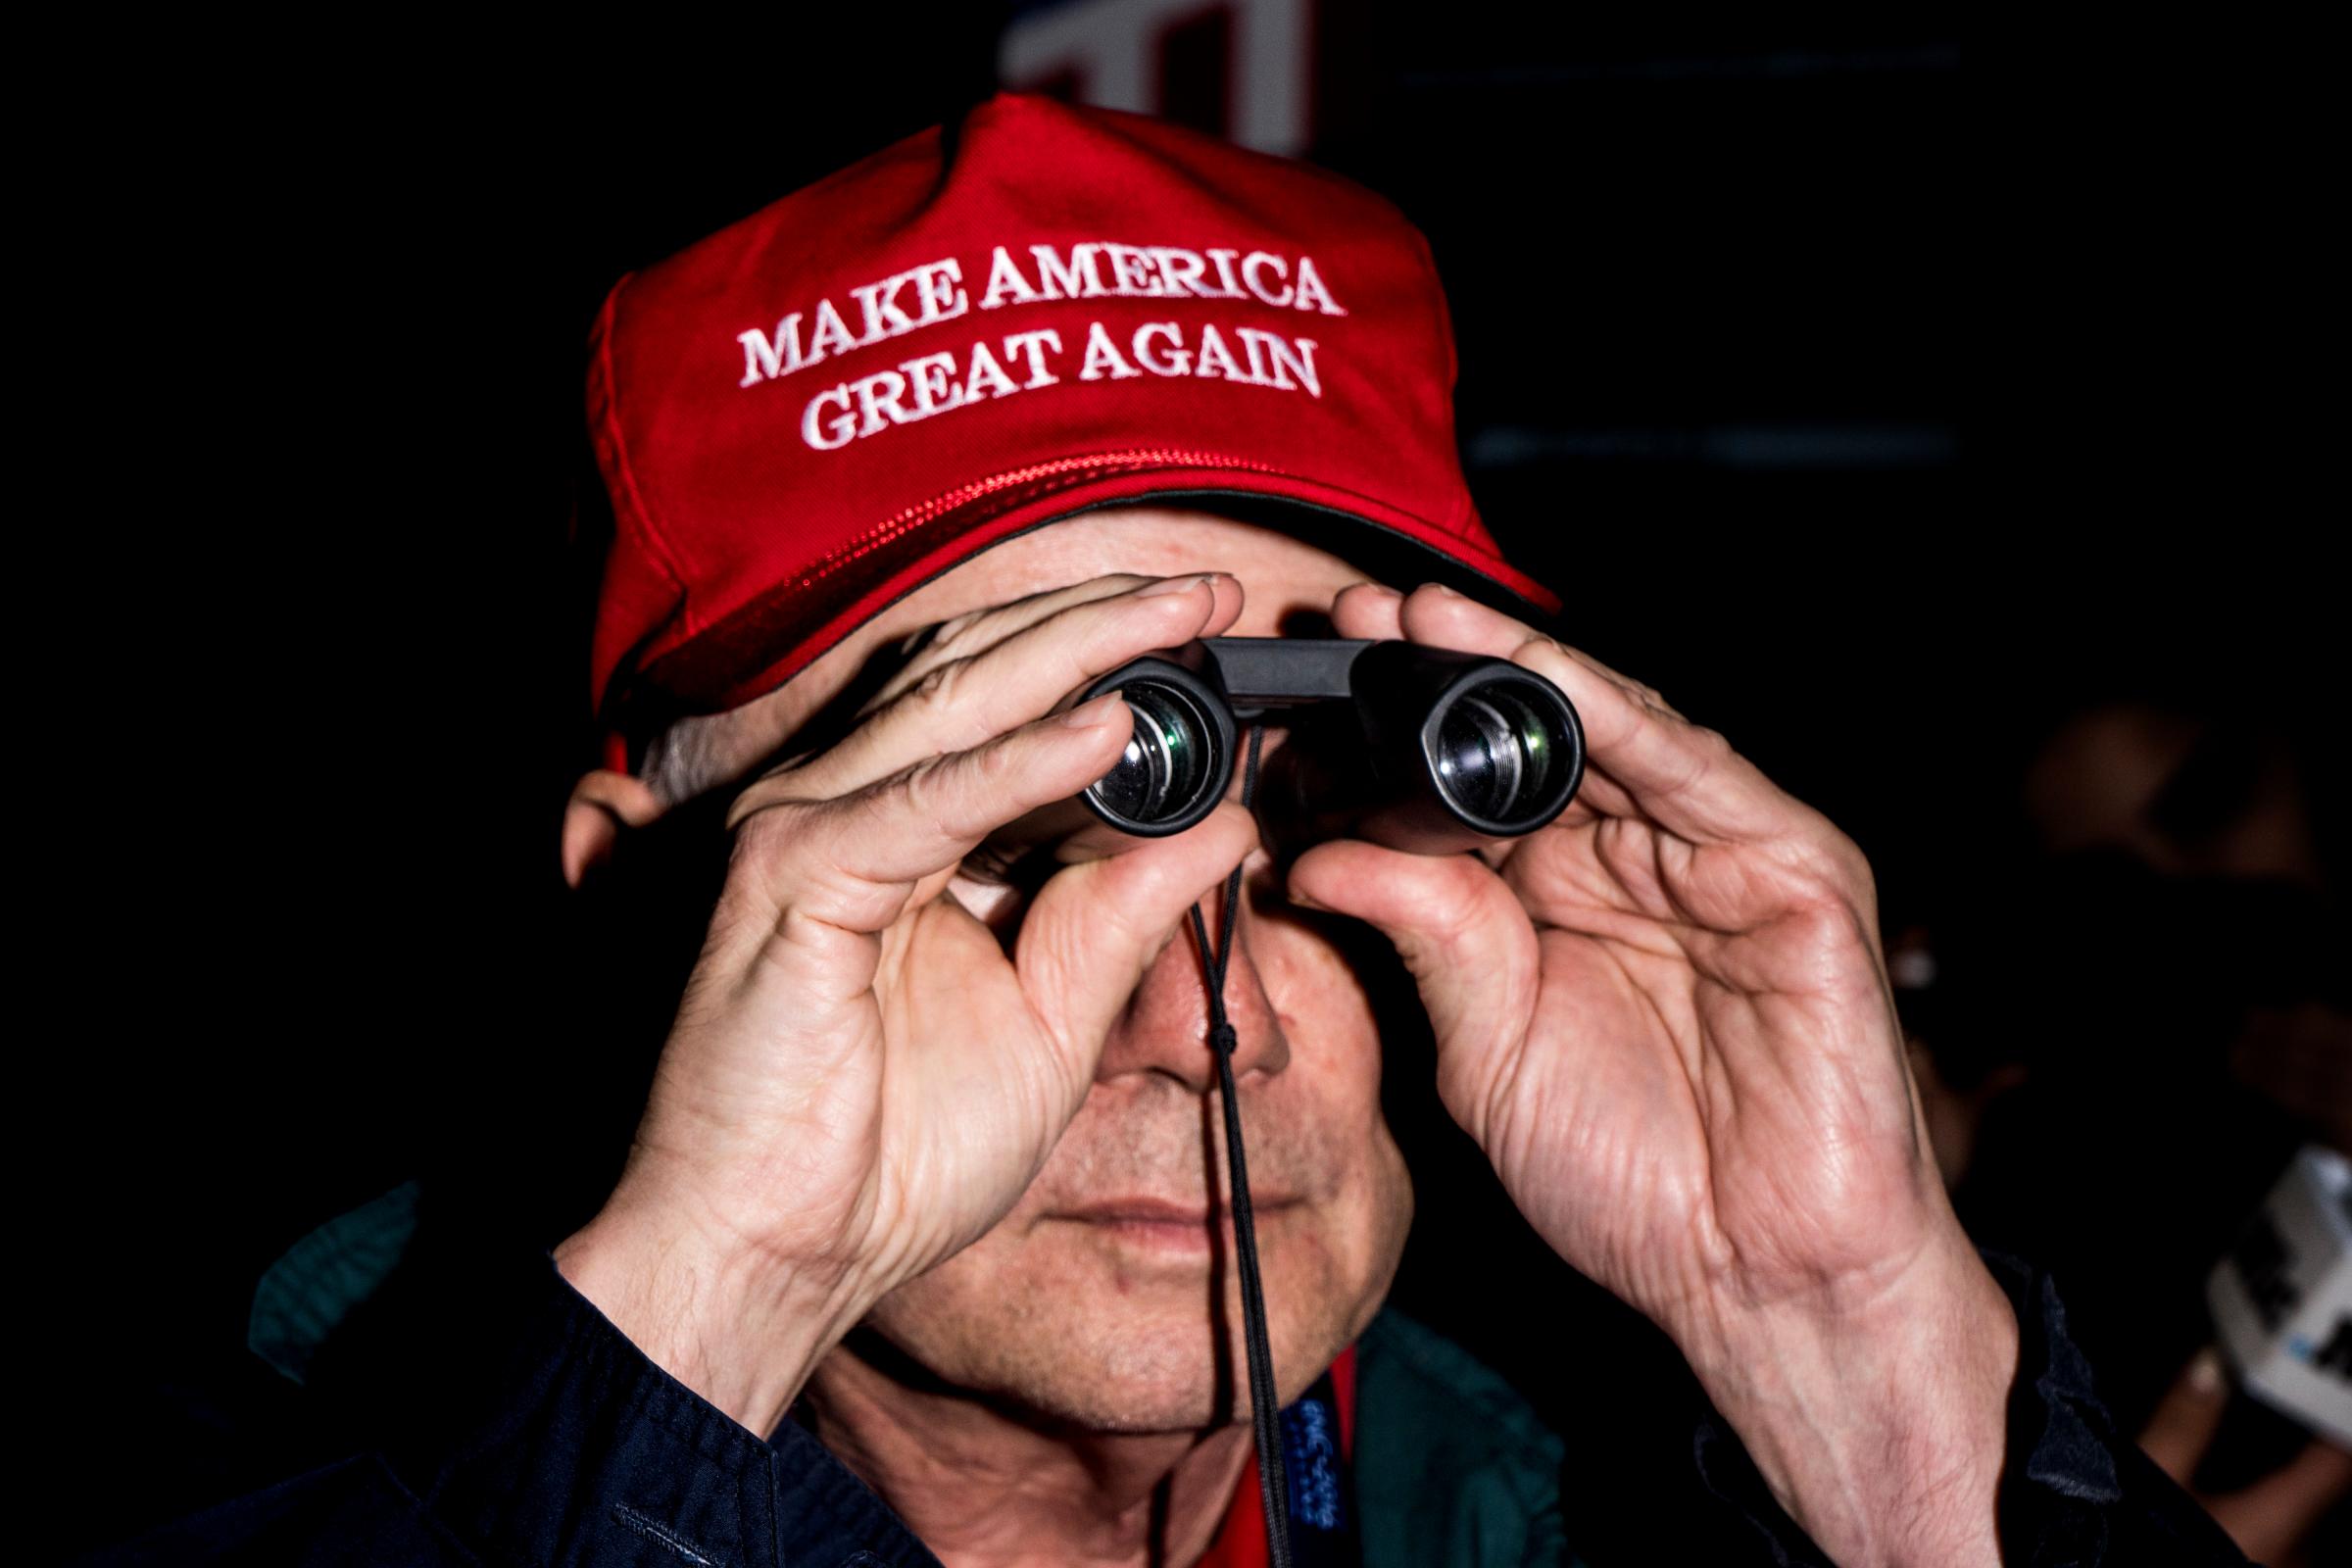 A man dons a "Make America Great Again" hat at the Republican National Convention in Cleveland.